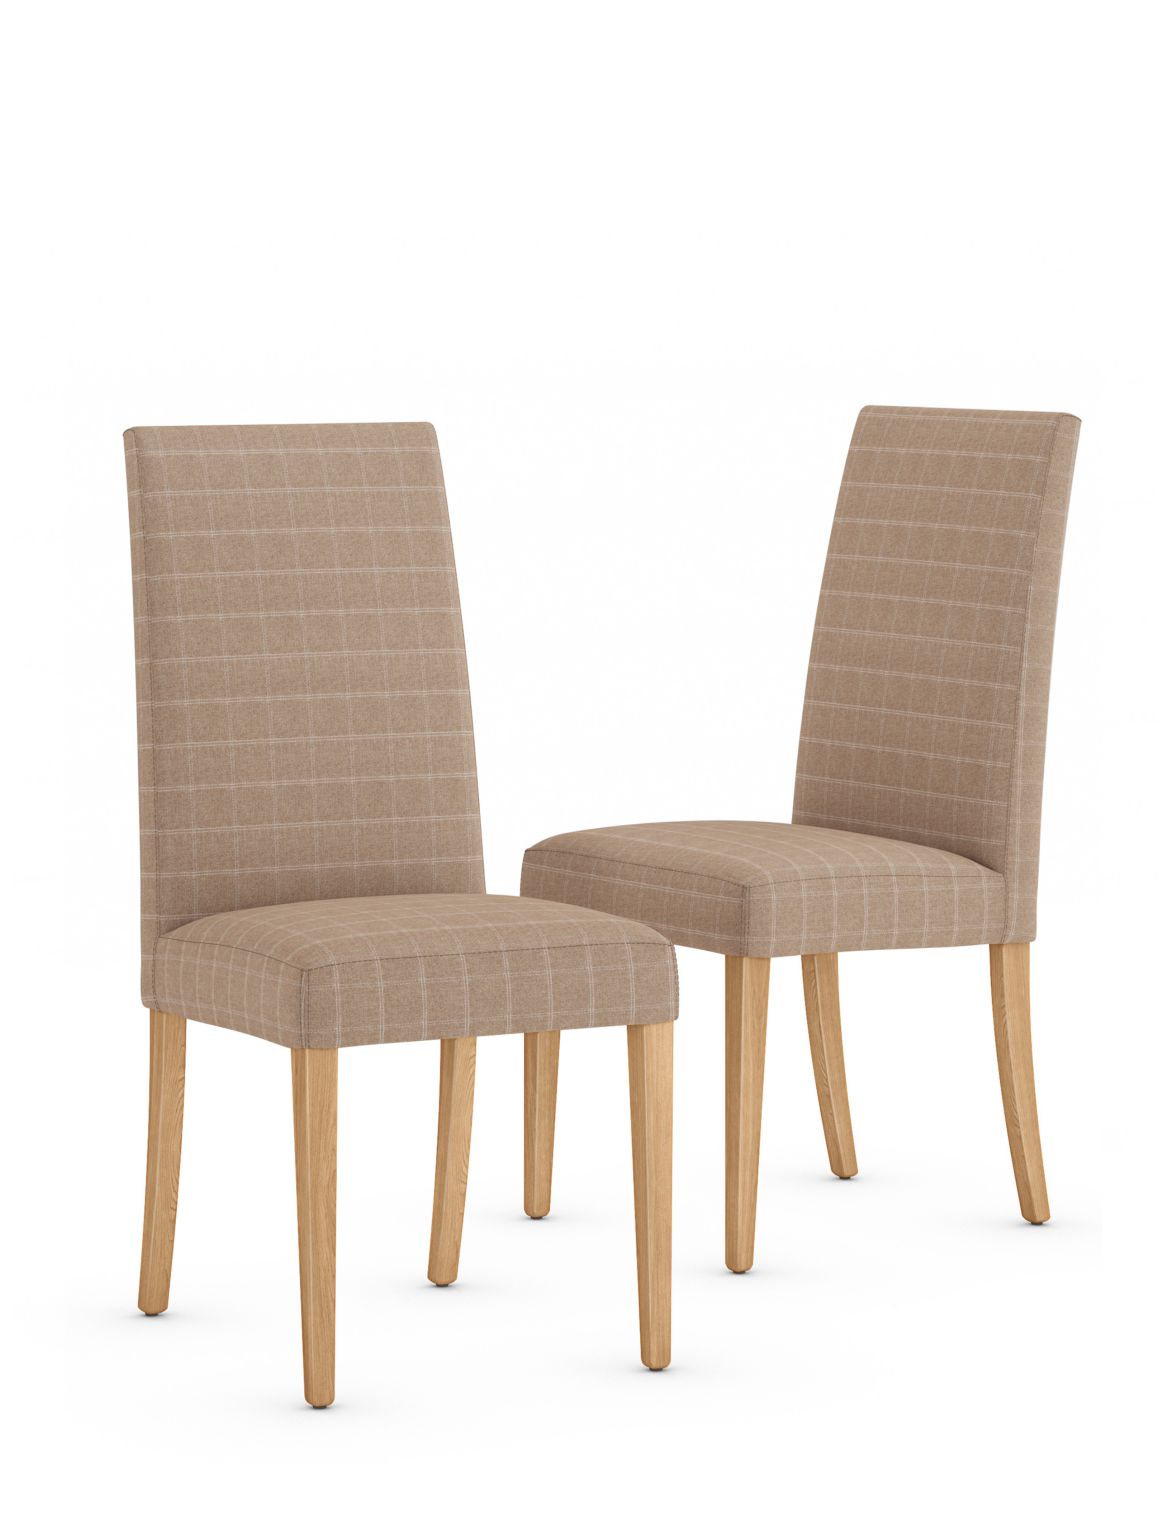 Set of 2 Alton Checked Fabric Dining Chairs beige